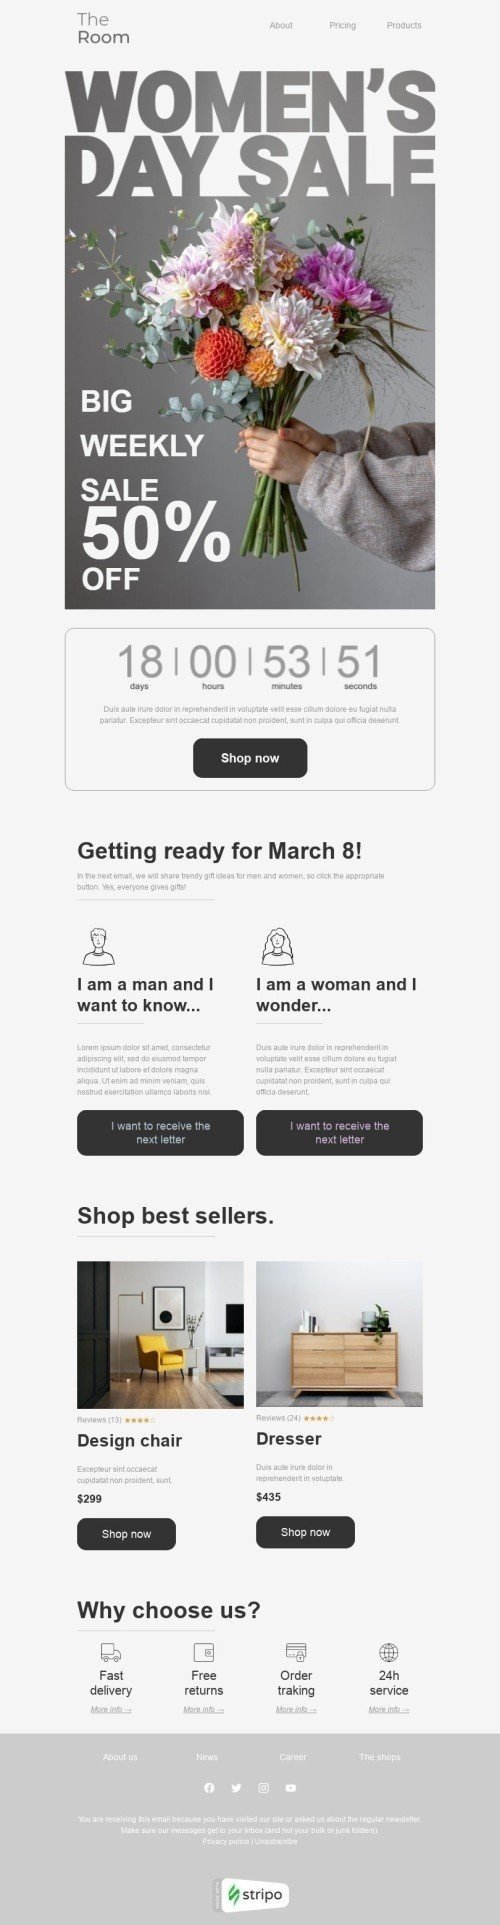 Women's Day Email Template "Big weekly sale" for Furniture, Interior & DIY industry mobile view